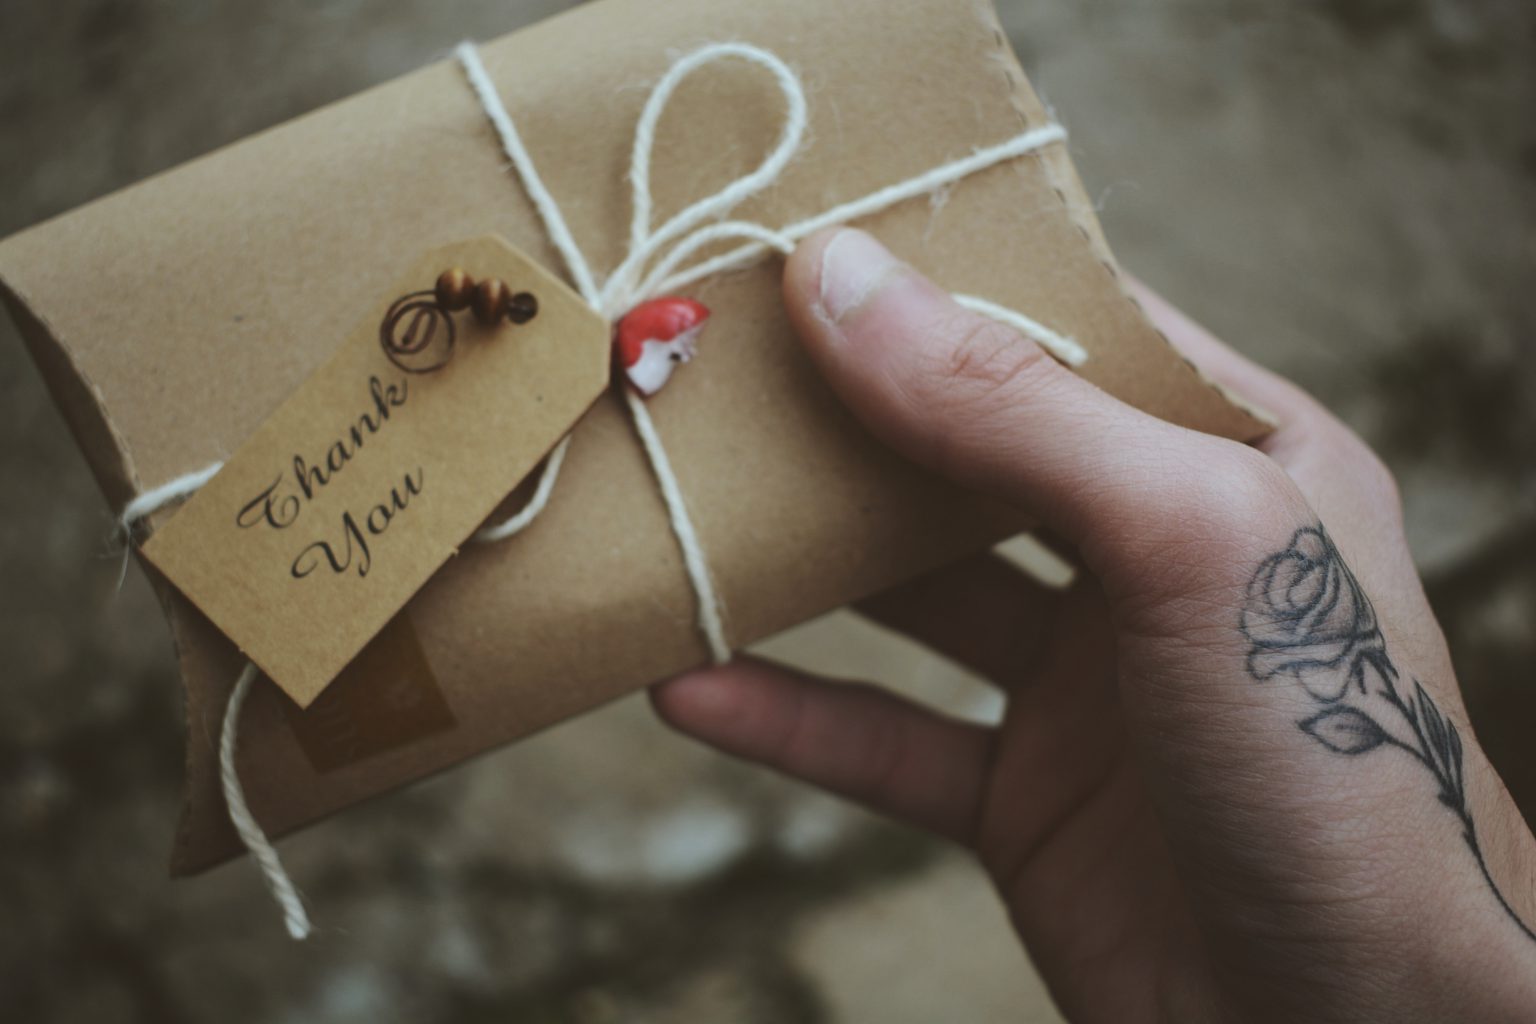 5 Thank You Gift Ideas for Someone Special